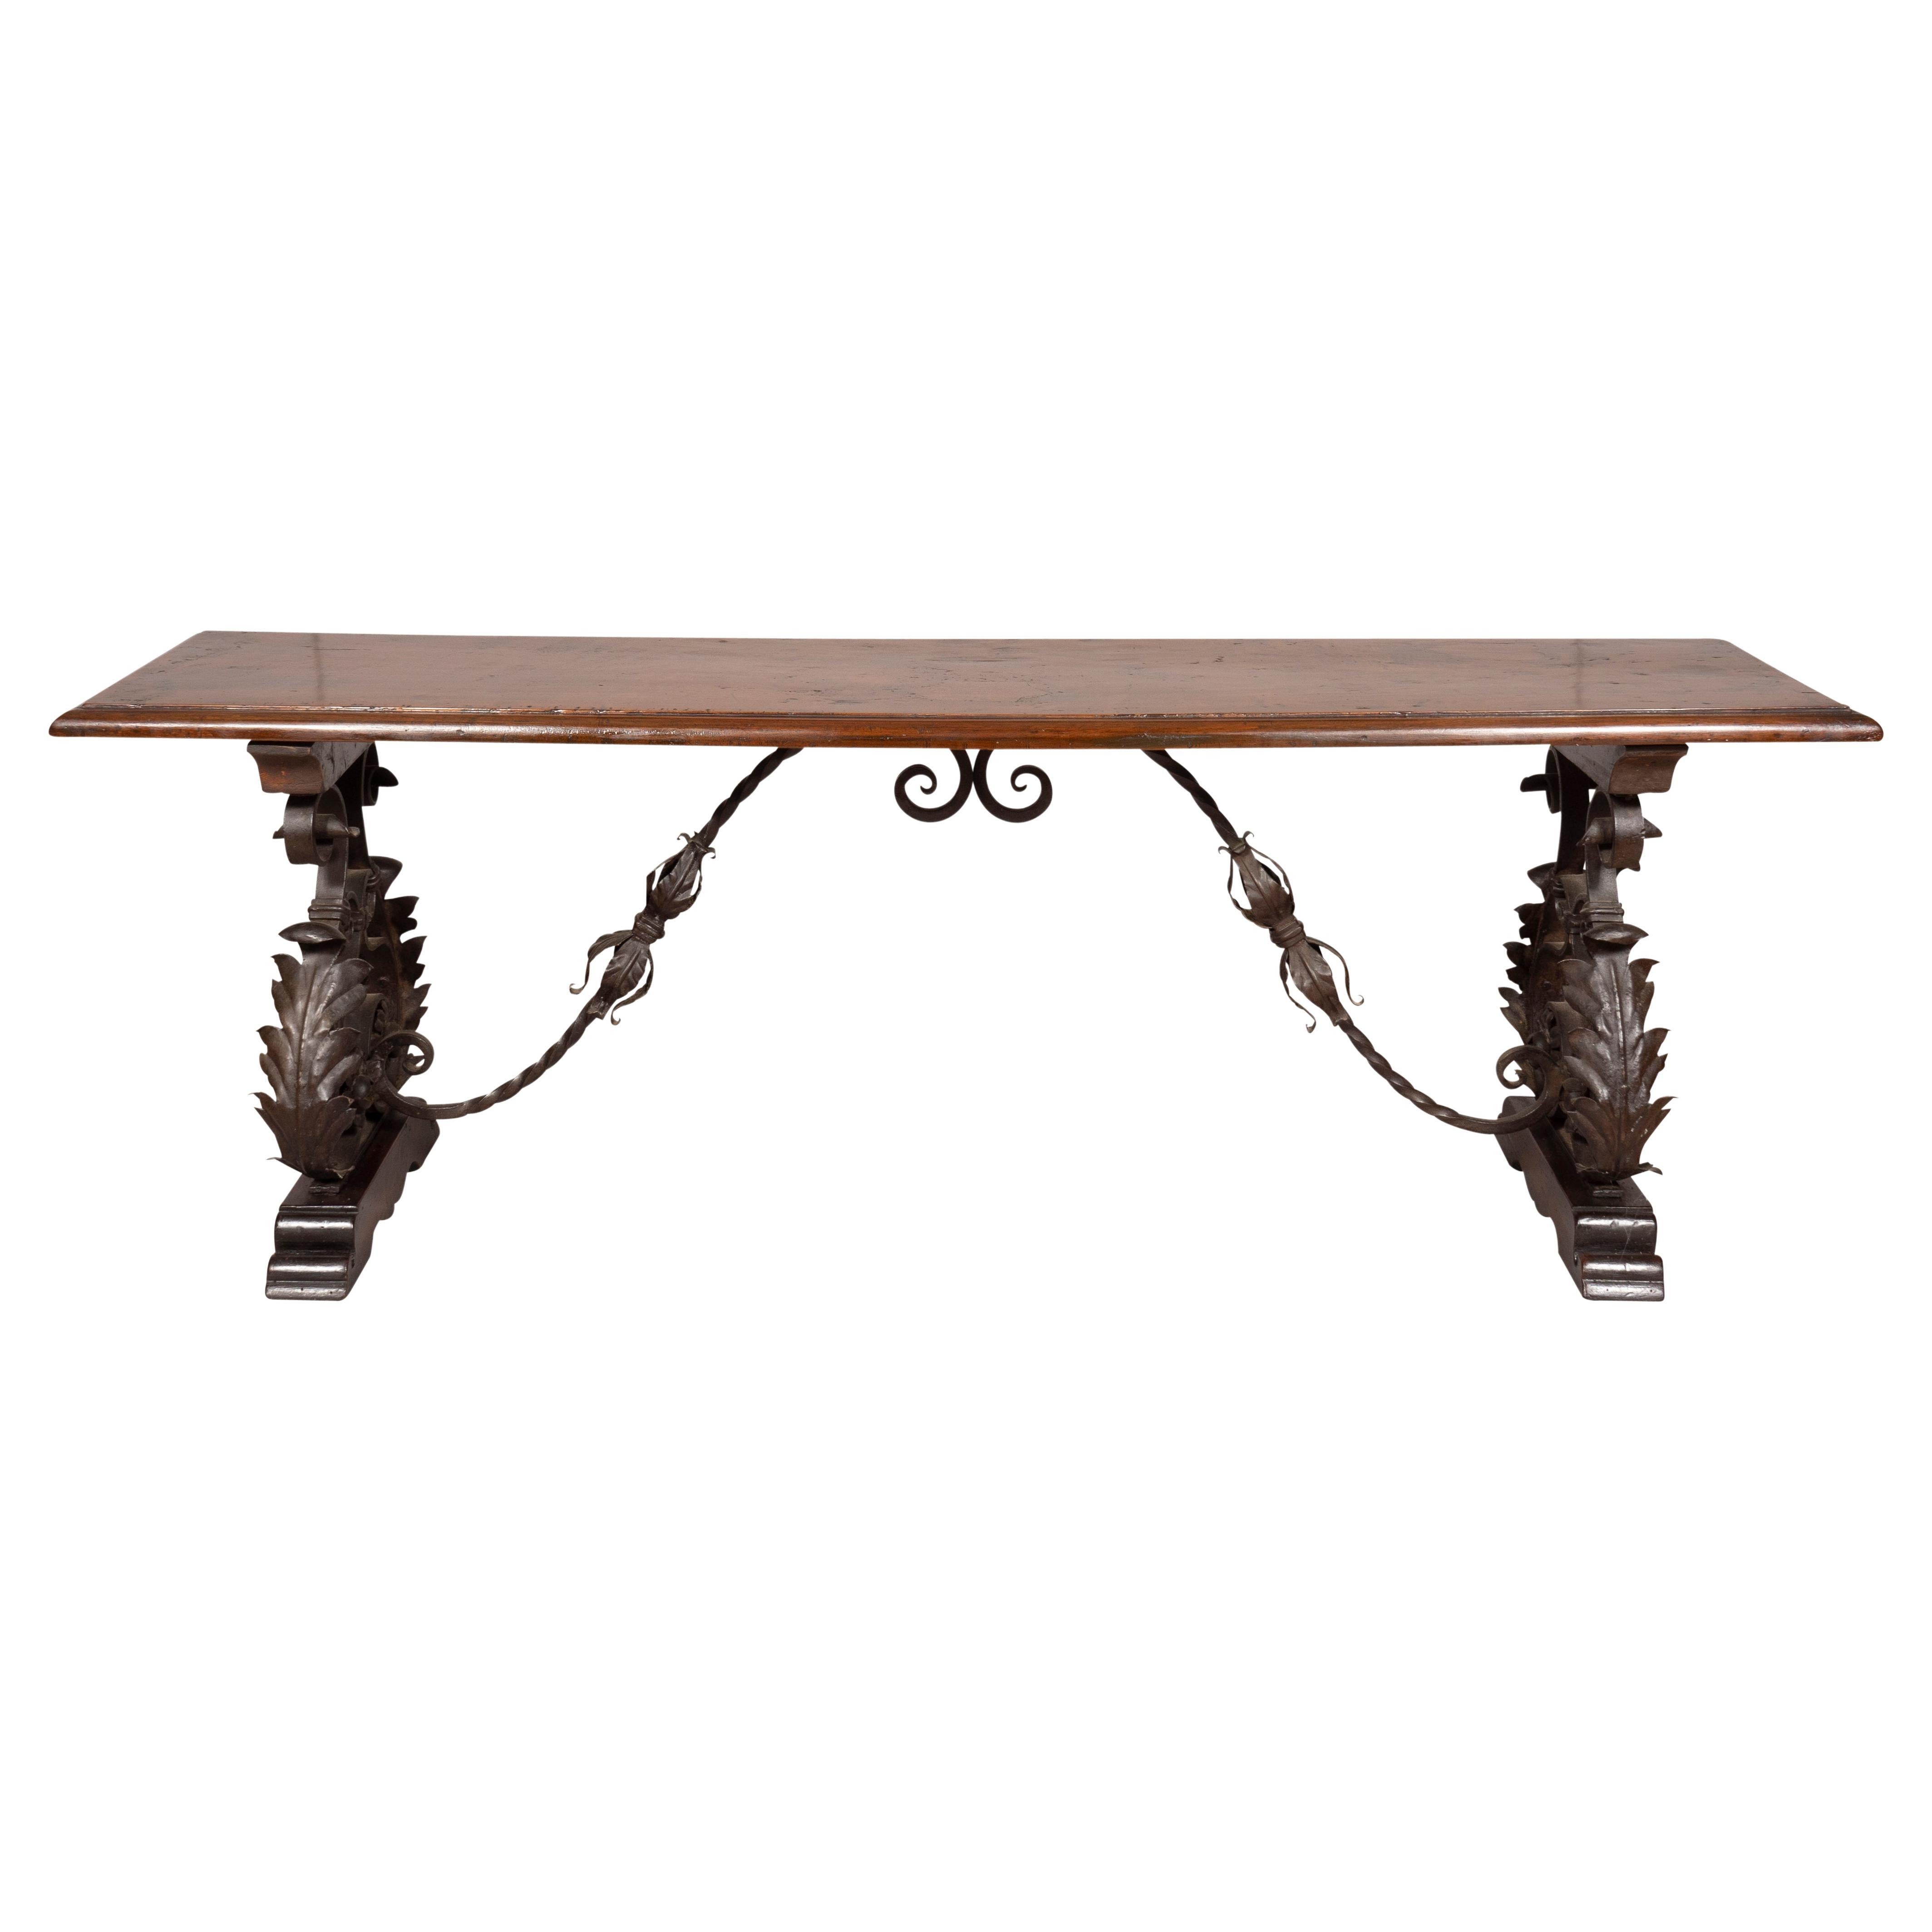 The rectangular top over an elaborate iron base. Consisting of early elements. Great front hall bench.